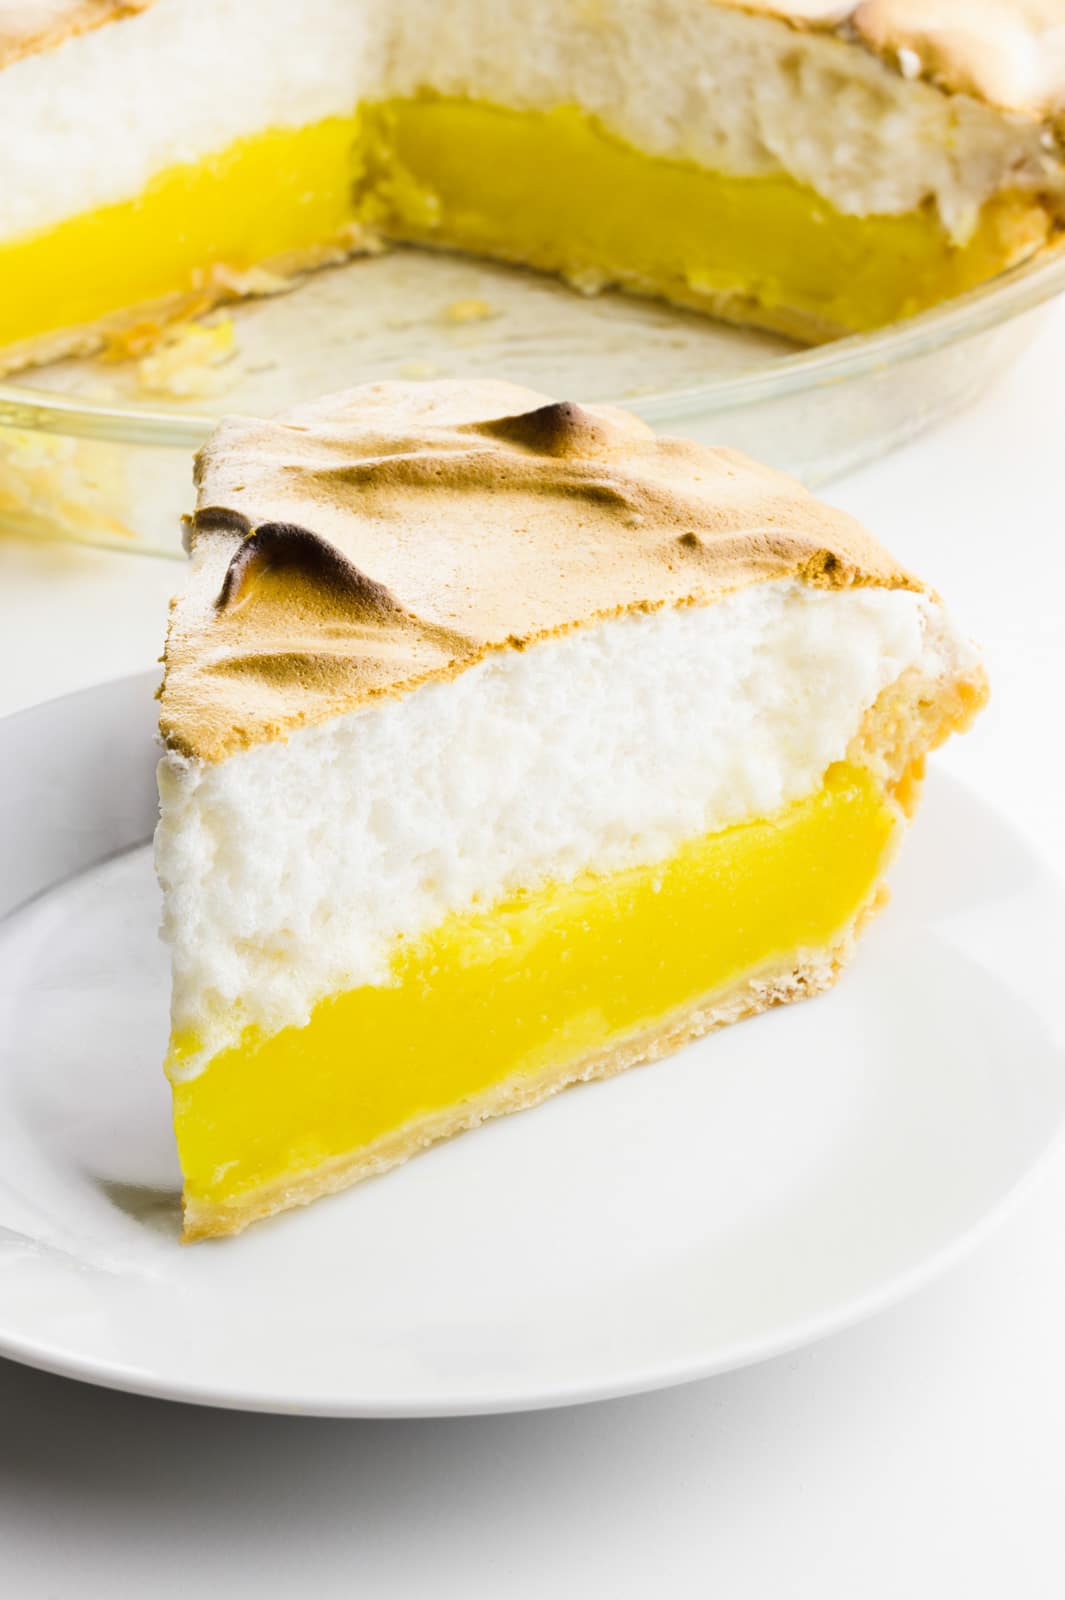 A slice of lemon meringue pie on a plate sits in front of the rest of the pie.